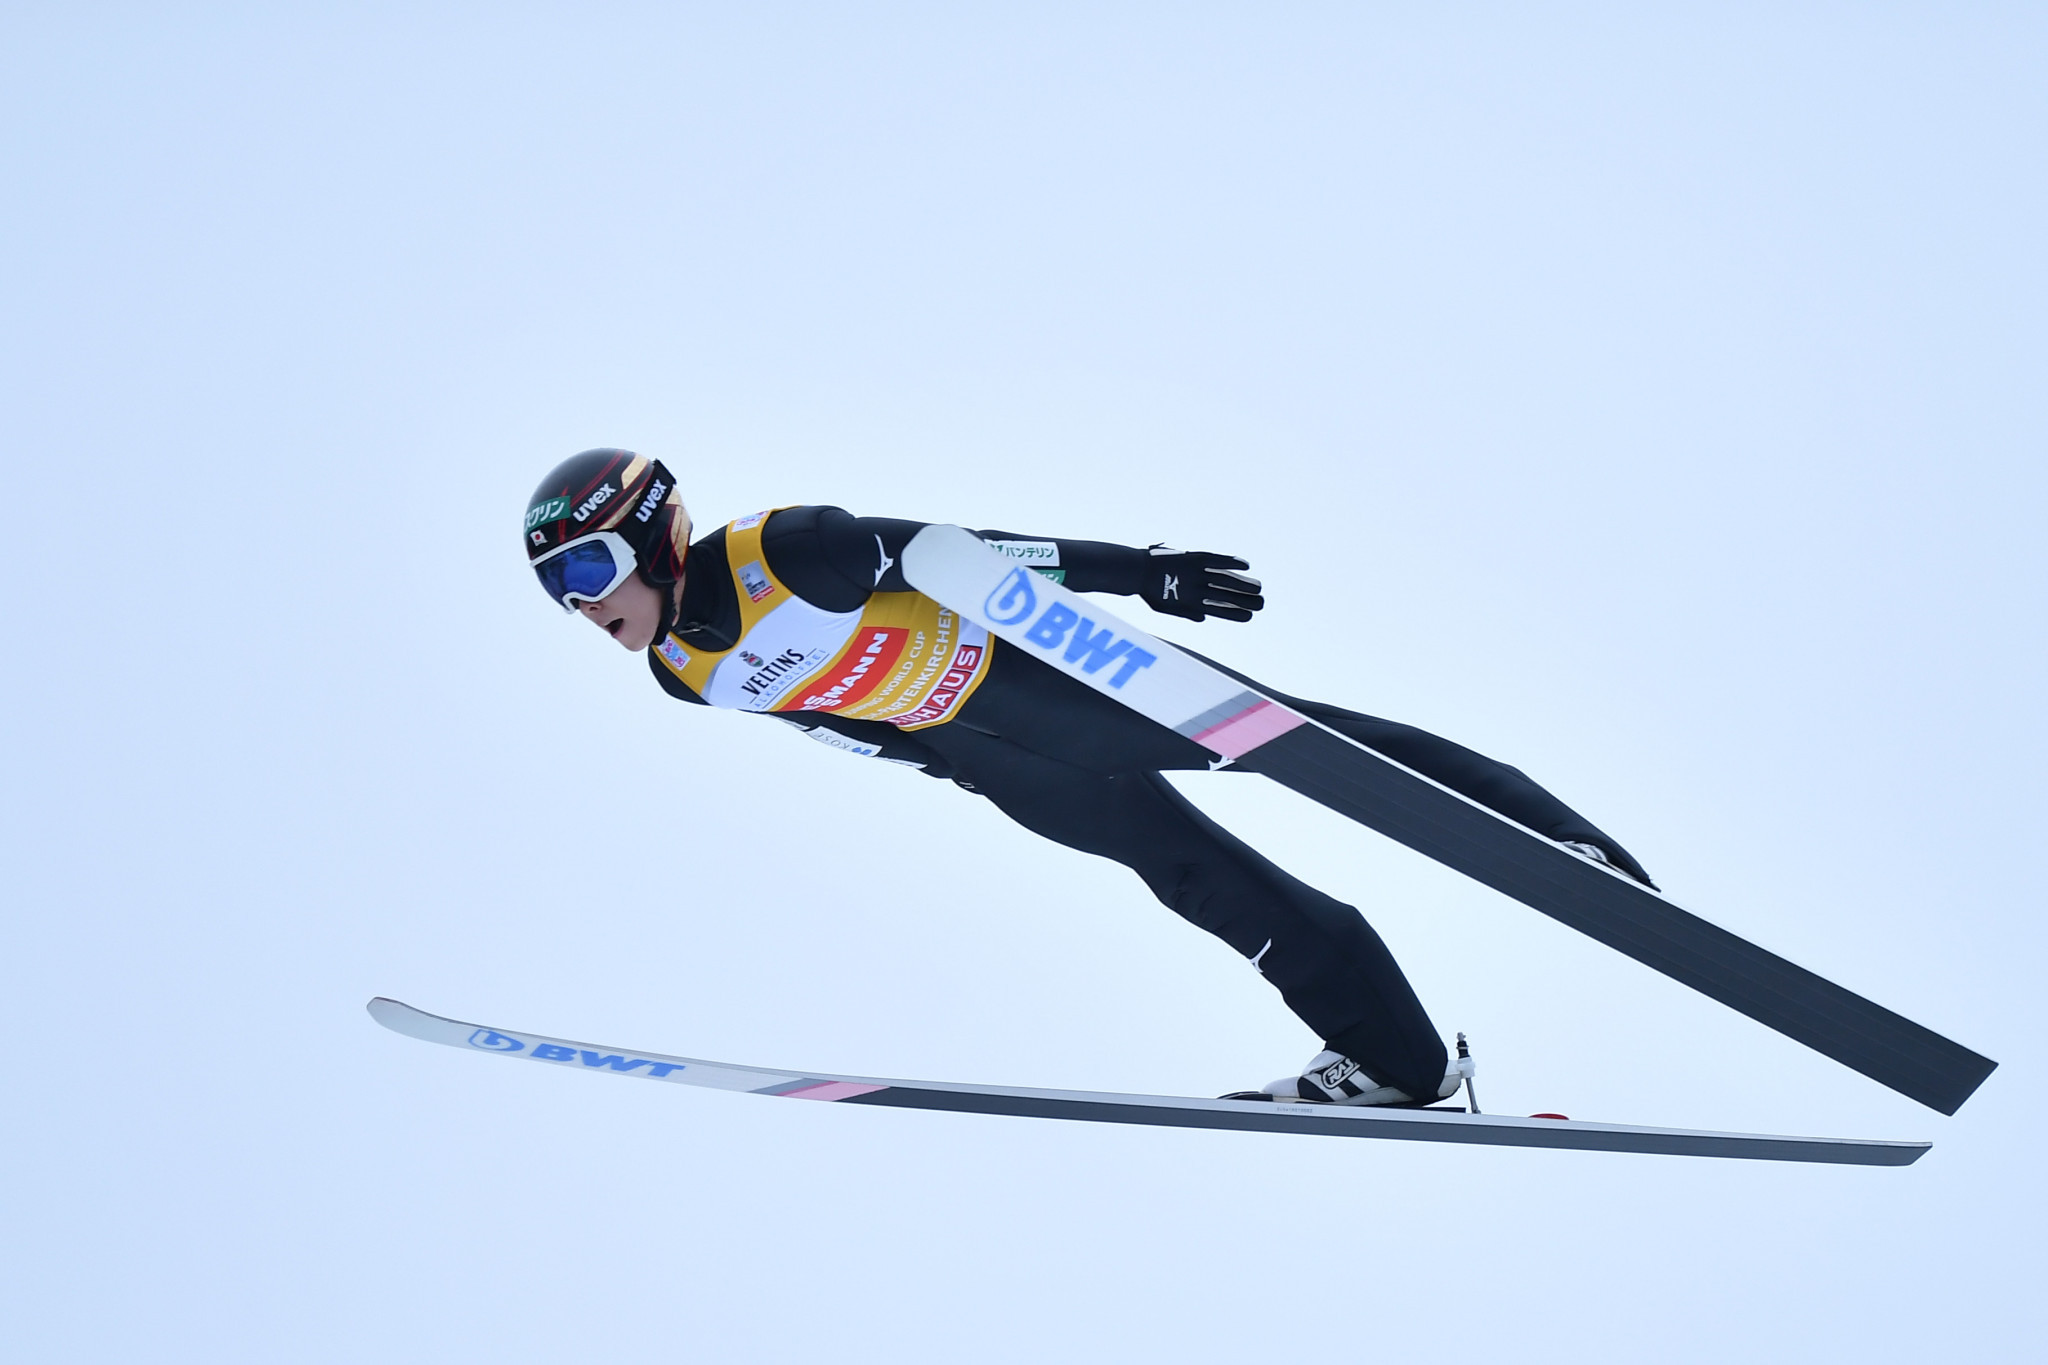 Ryōyū Kobayashi qualified in second after winning the first Four Hills event ©Getty Images